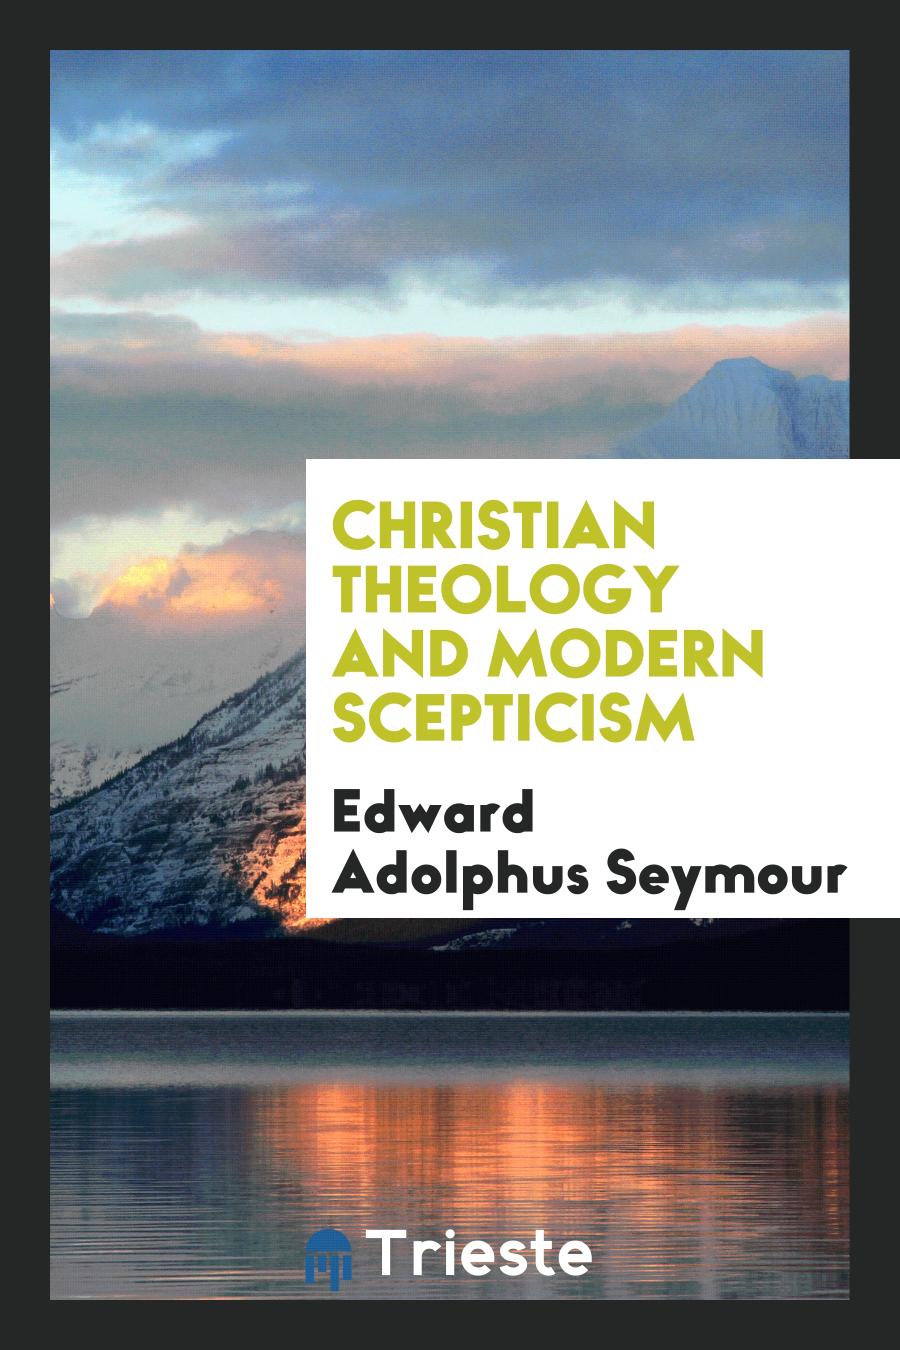 Christian Theology and Modern Scepticism